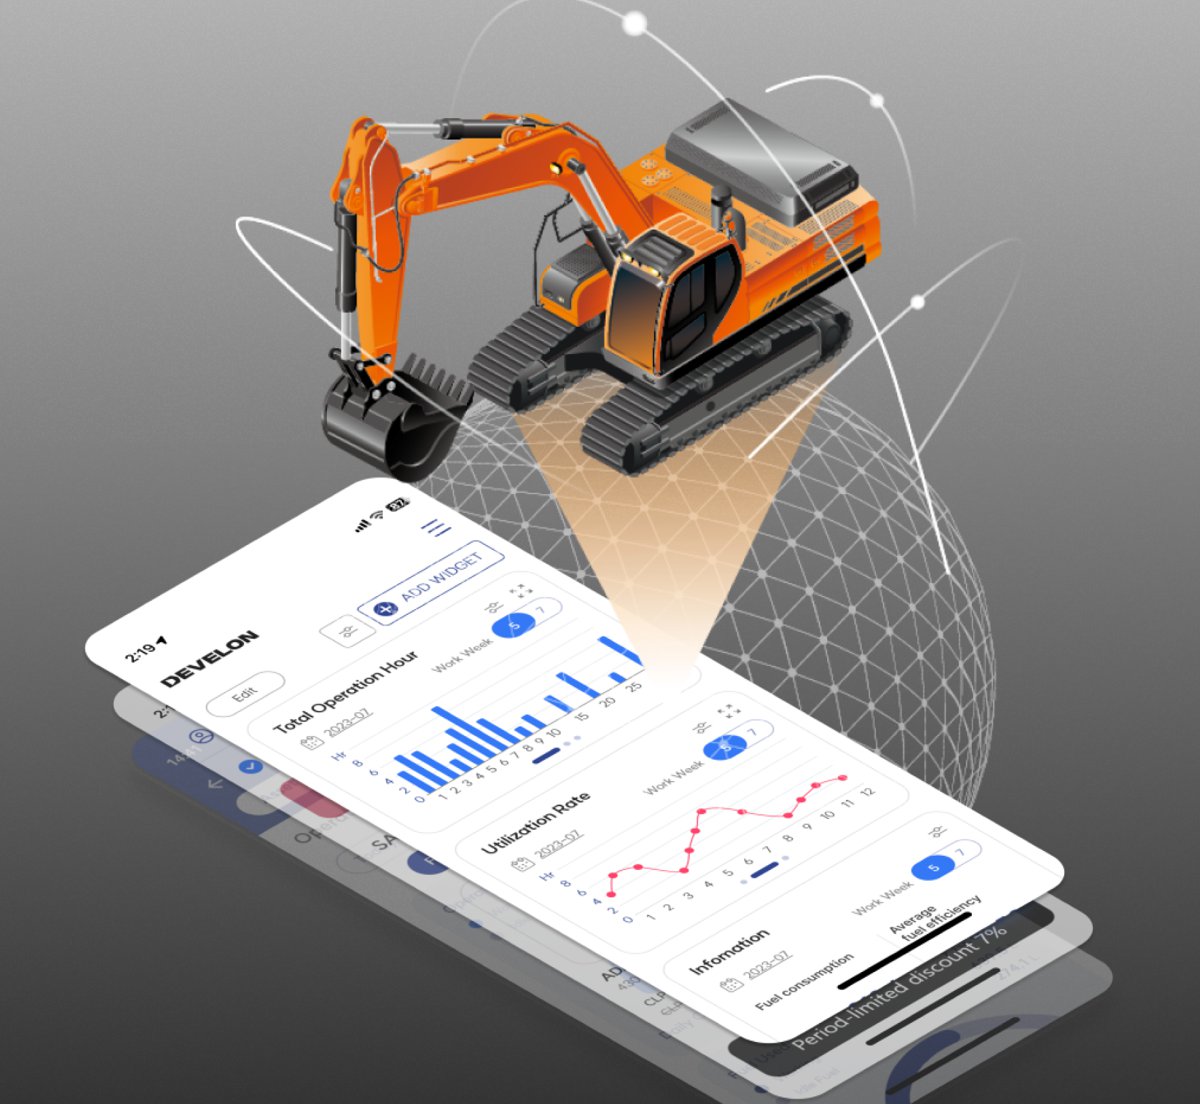 MY DEVELON Digital Platform launched to Manage Construction Equipment